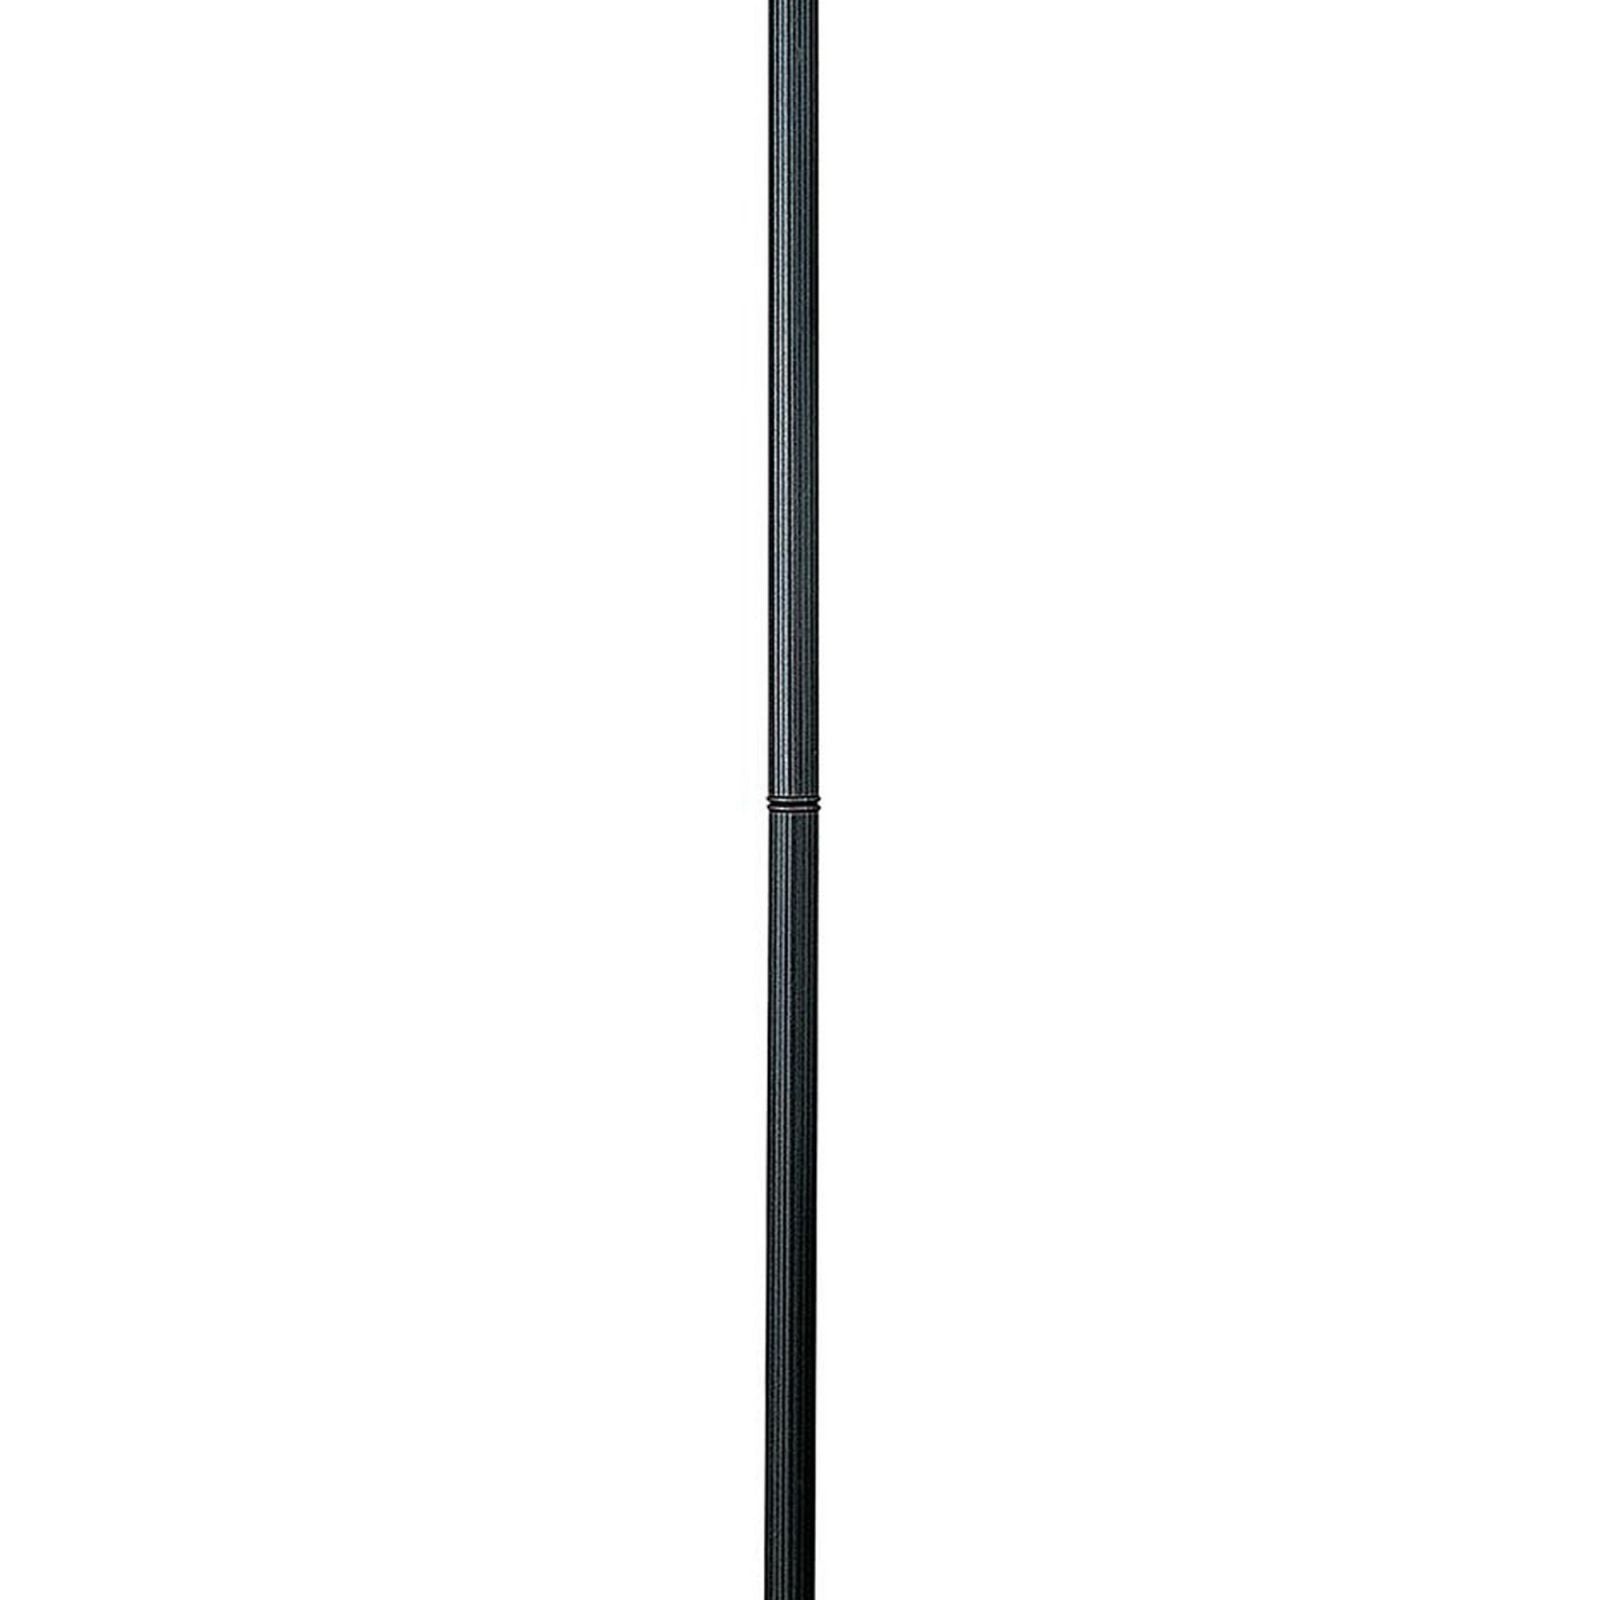 Paper Wrapped Tapered Shade Double Chain Floor Lamp, Brown And Metal Gray By Benzara